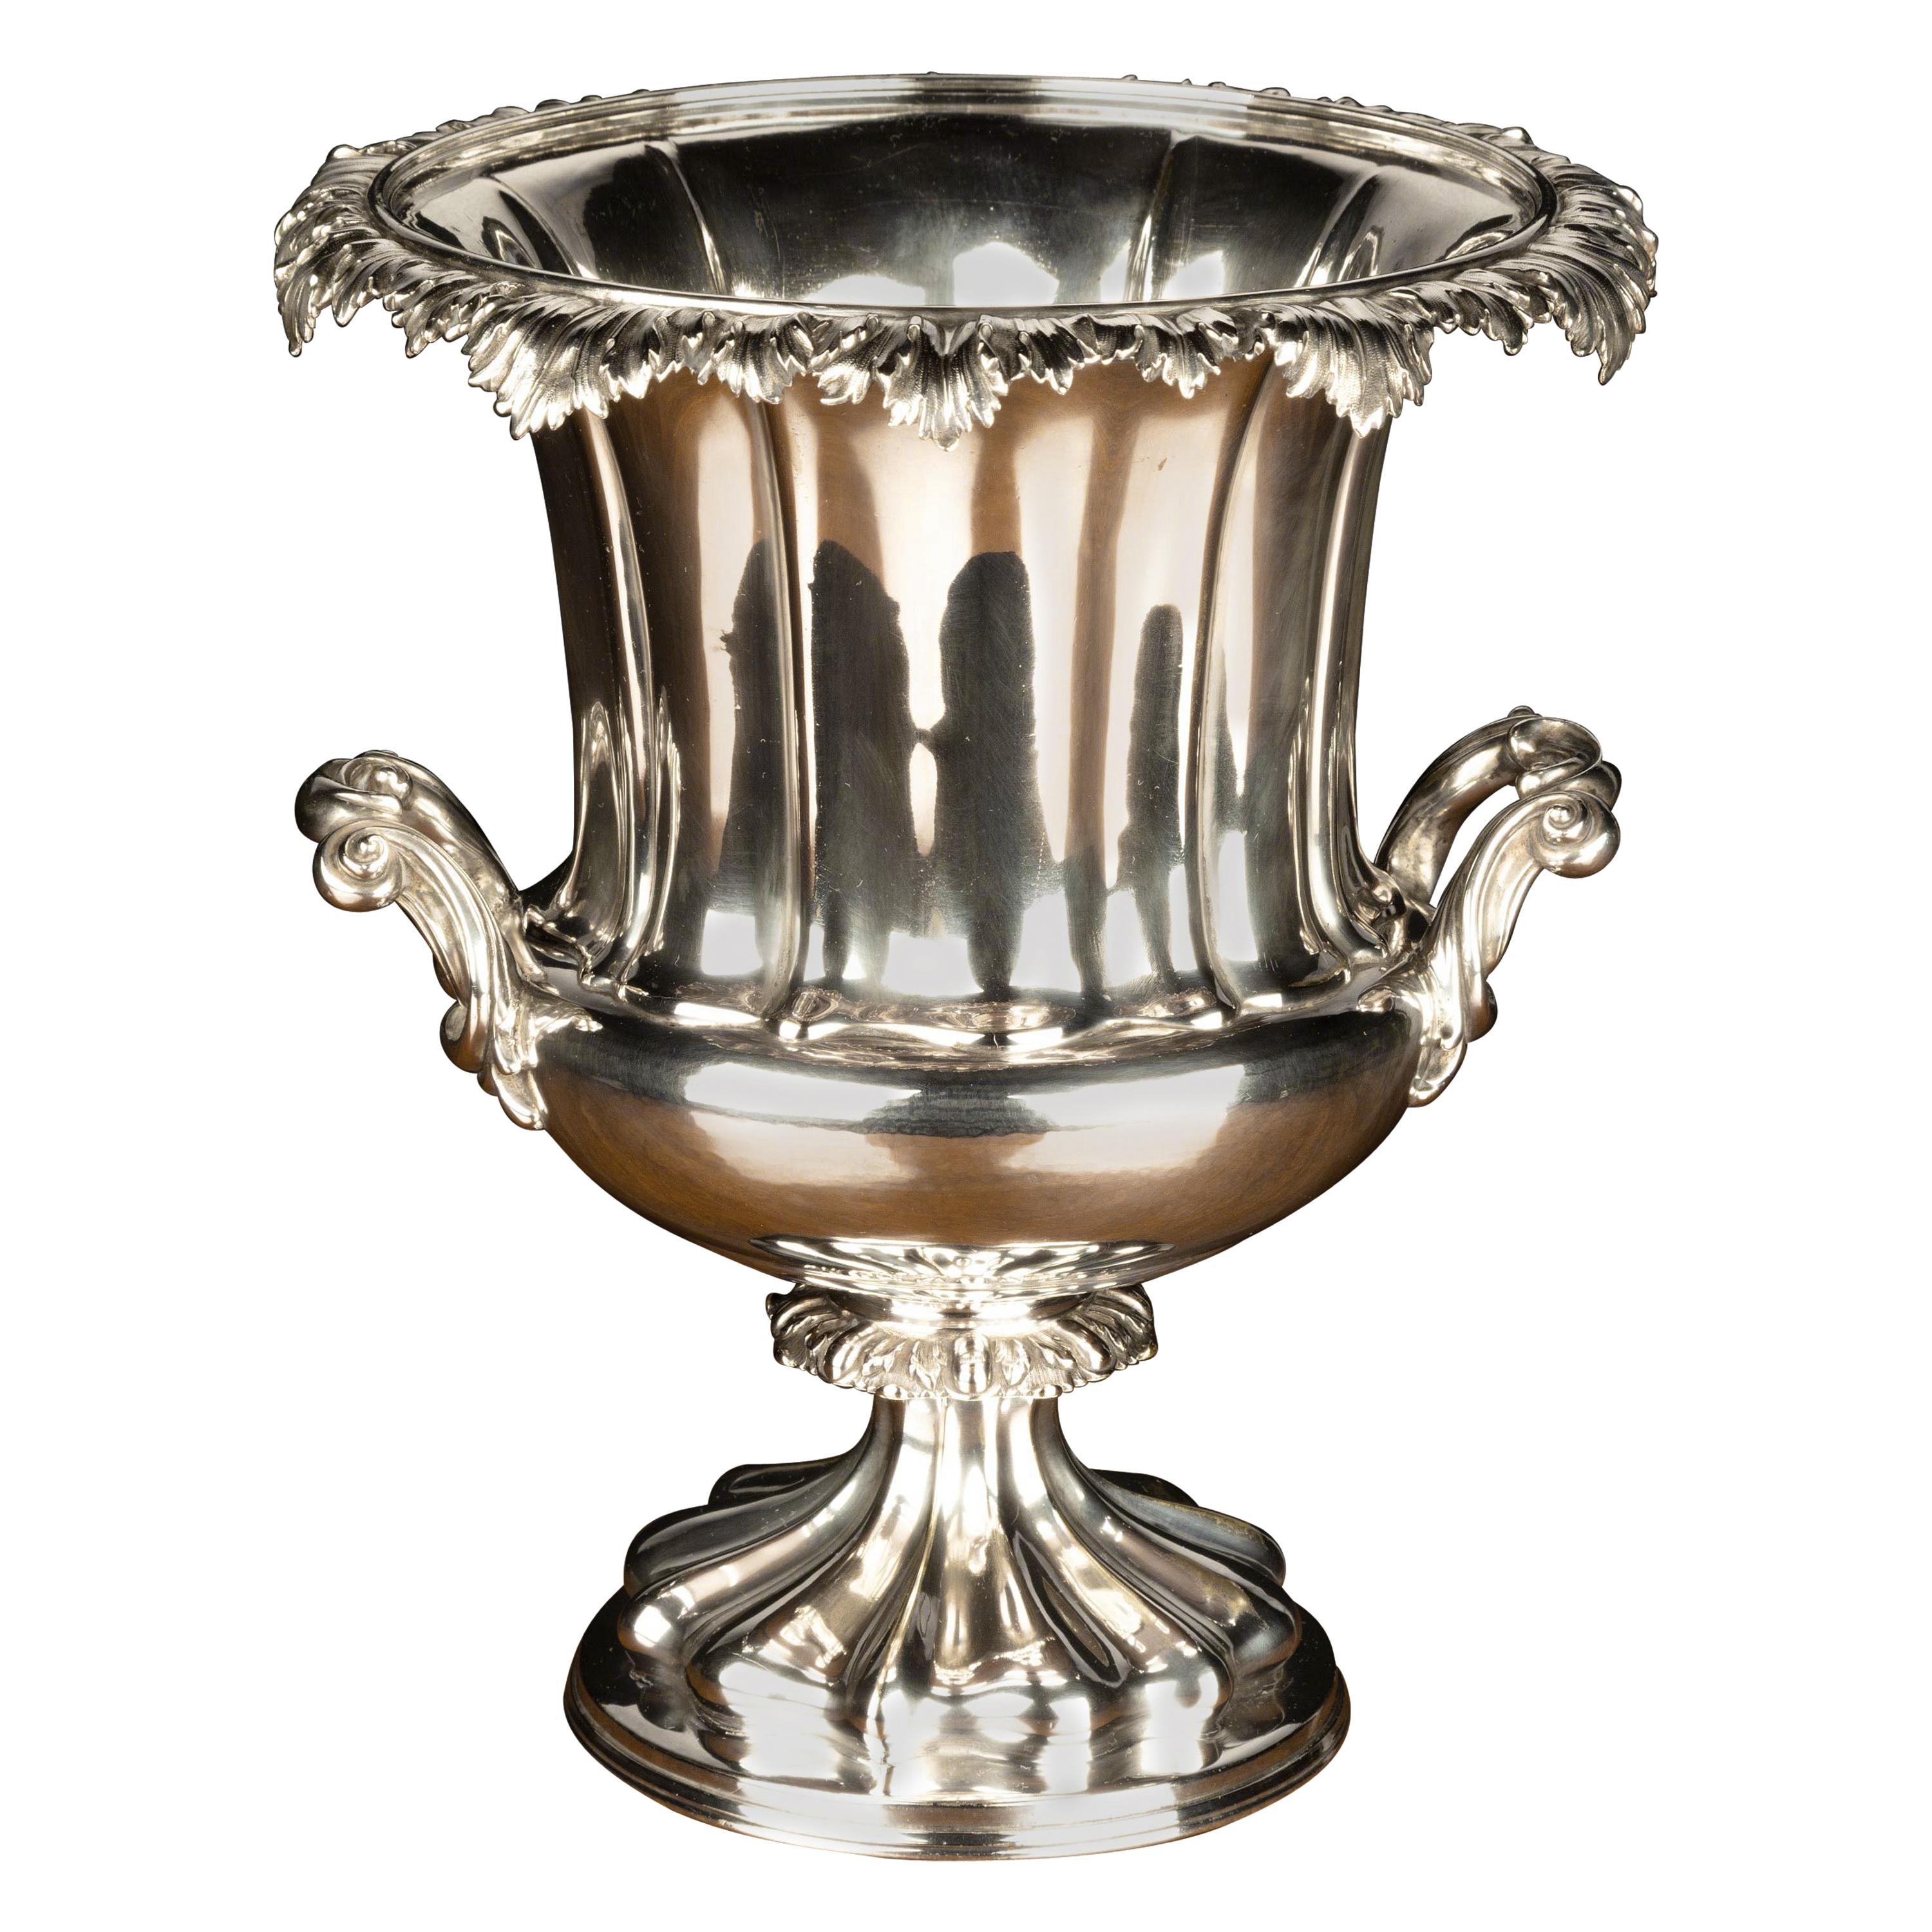 Good Mid-19th Century Sheffield Plated Champagne Bucket